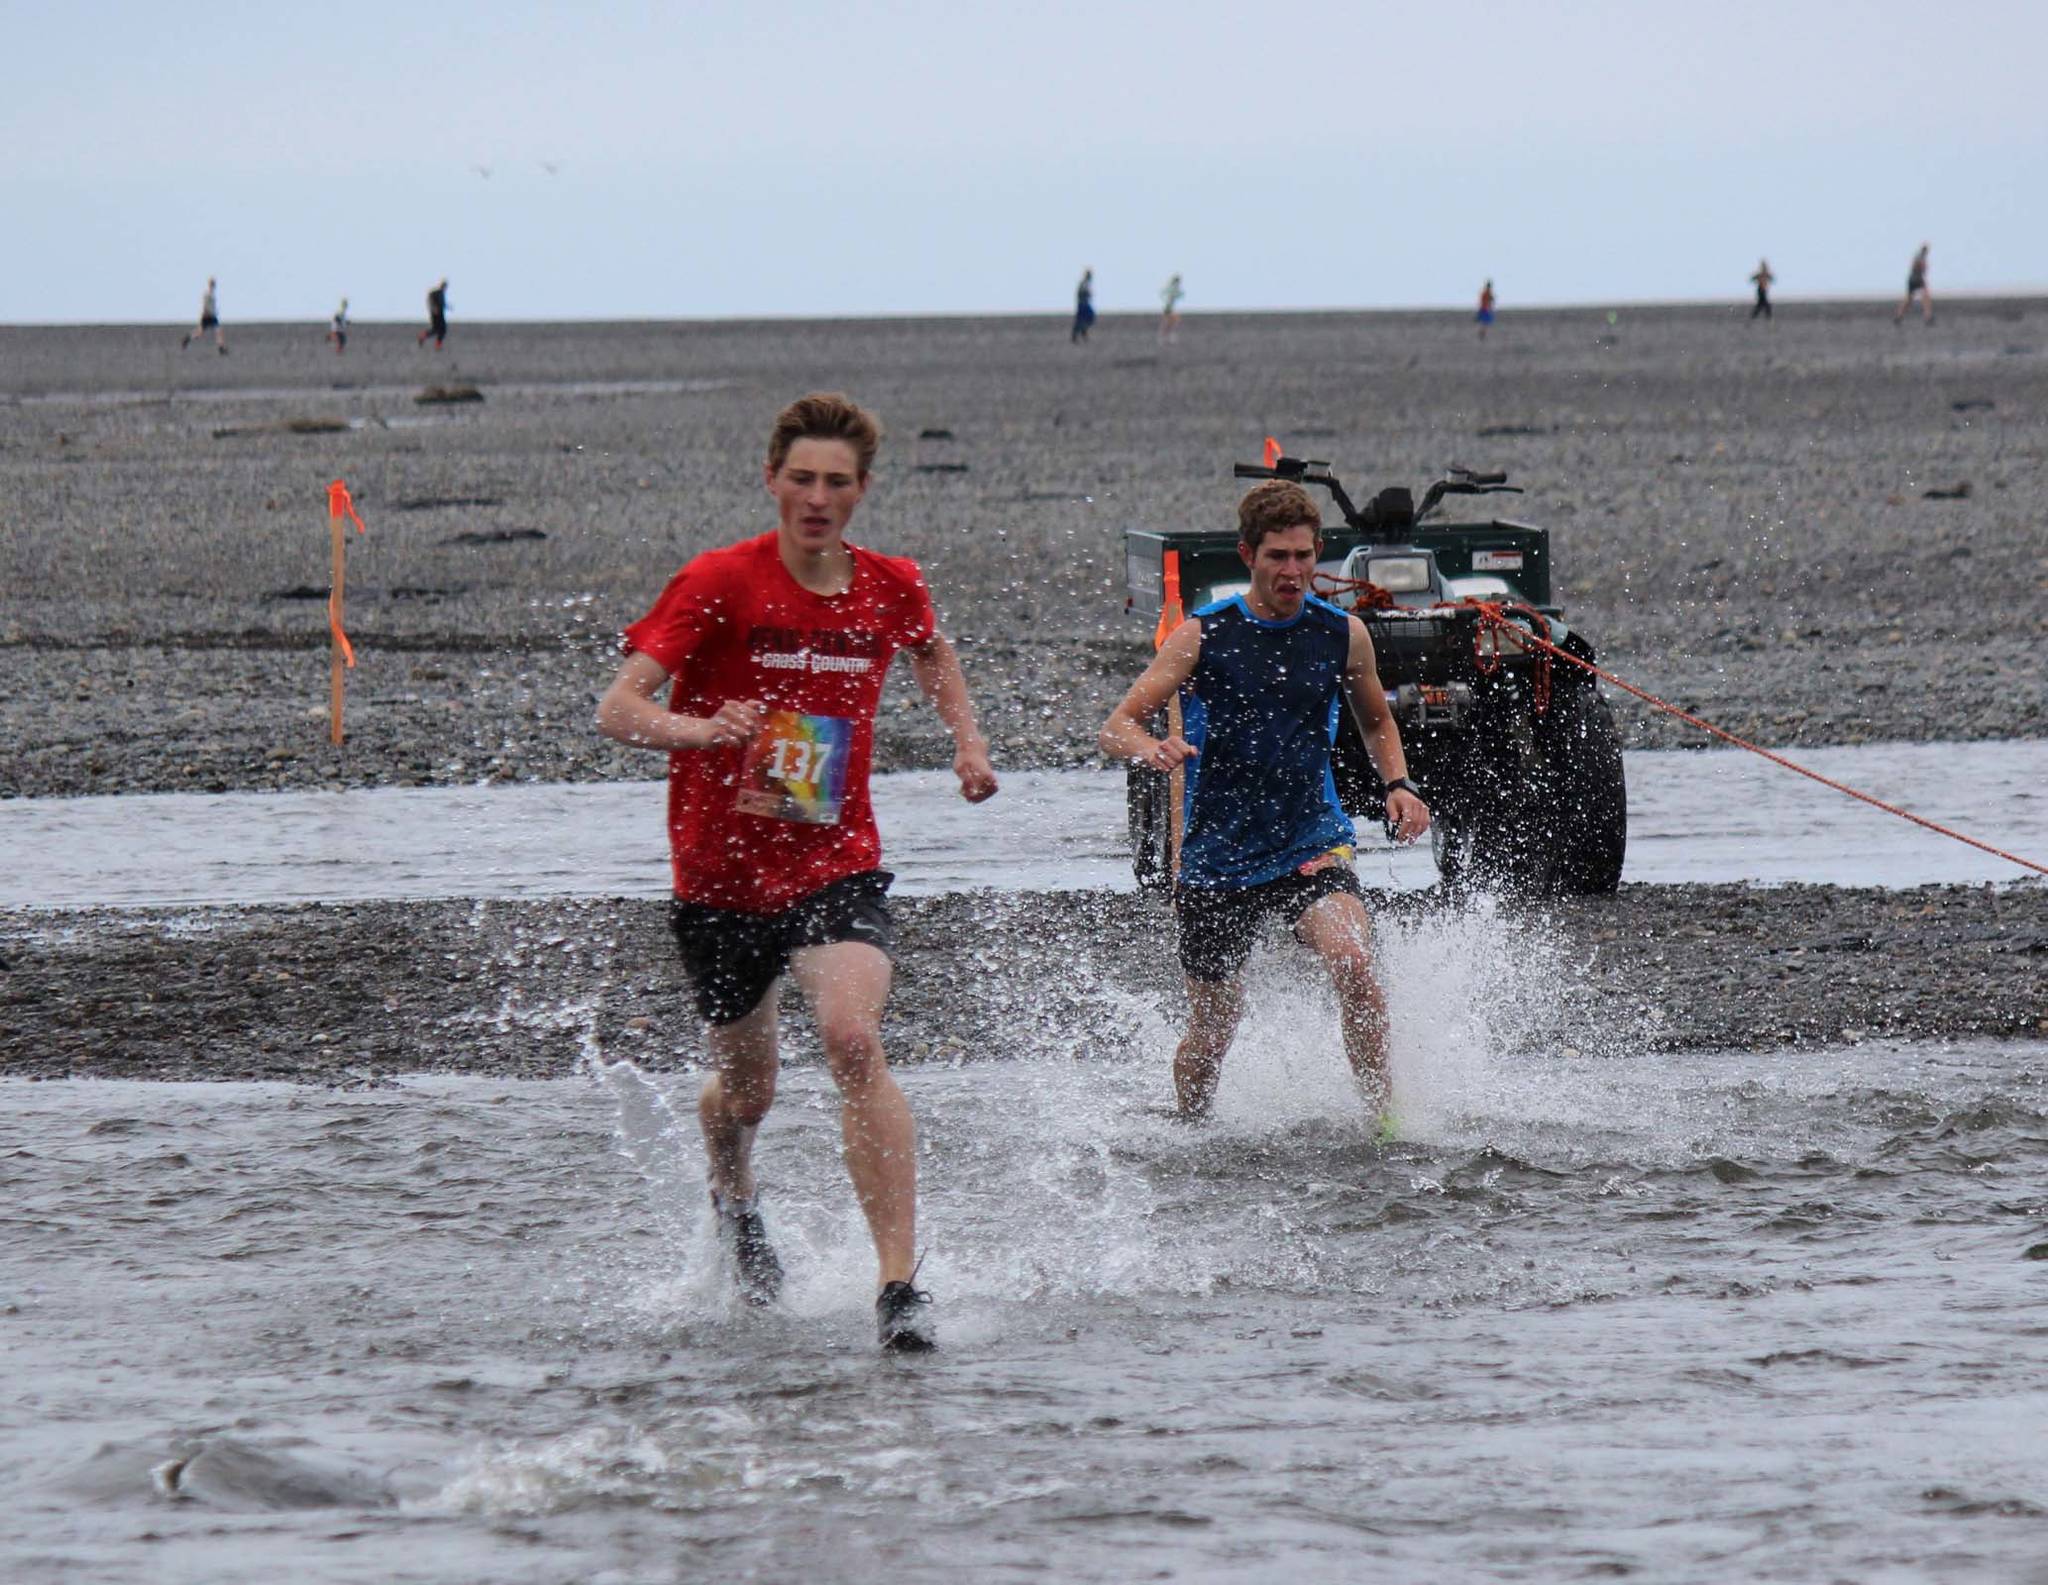 Maison Dunham, fastest finisher in the Clam Scramble of 2017 and 2018, is the first runner to cross the mouth of Deep Creek in the 2019 event, held on Saturday, June 15, 2019, in Ninilchik, Alaska. Close on his heels is Aaron Swedberg, who eventually pulled ahead and finished the 5K event with a time of 22 minutes, 16 seconds. Dunham finished in 22:17. (Photo by McKibben Jackinsky)